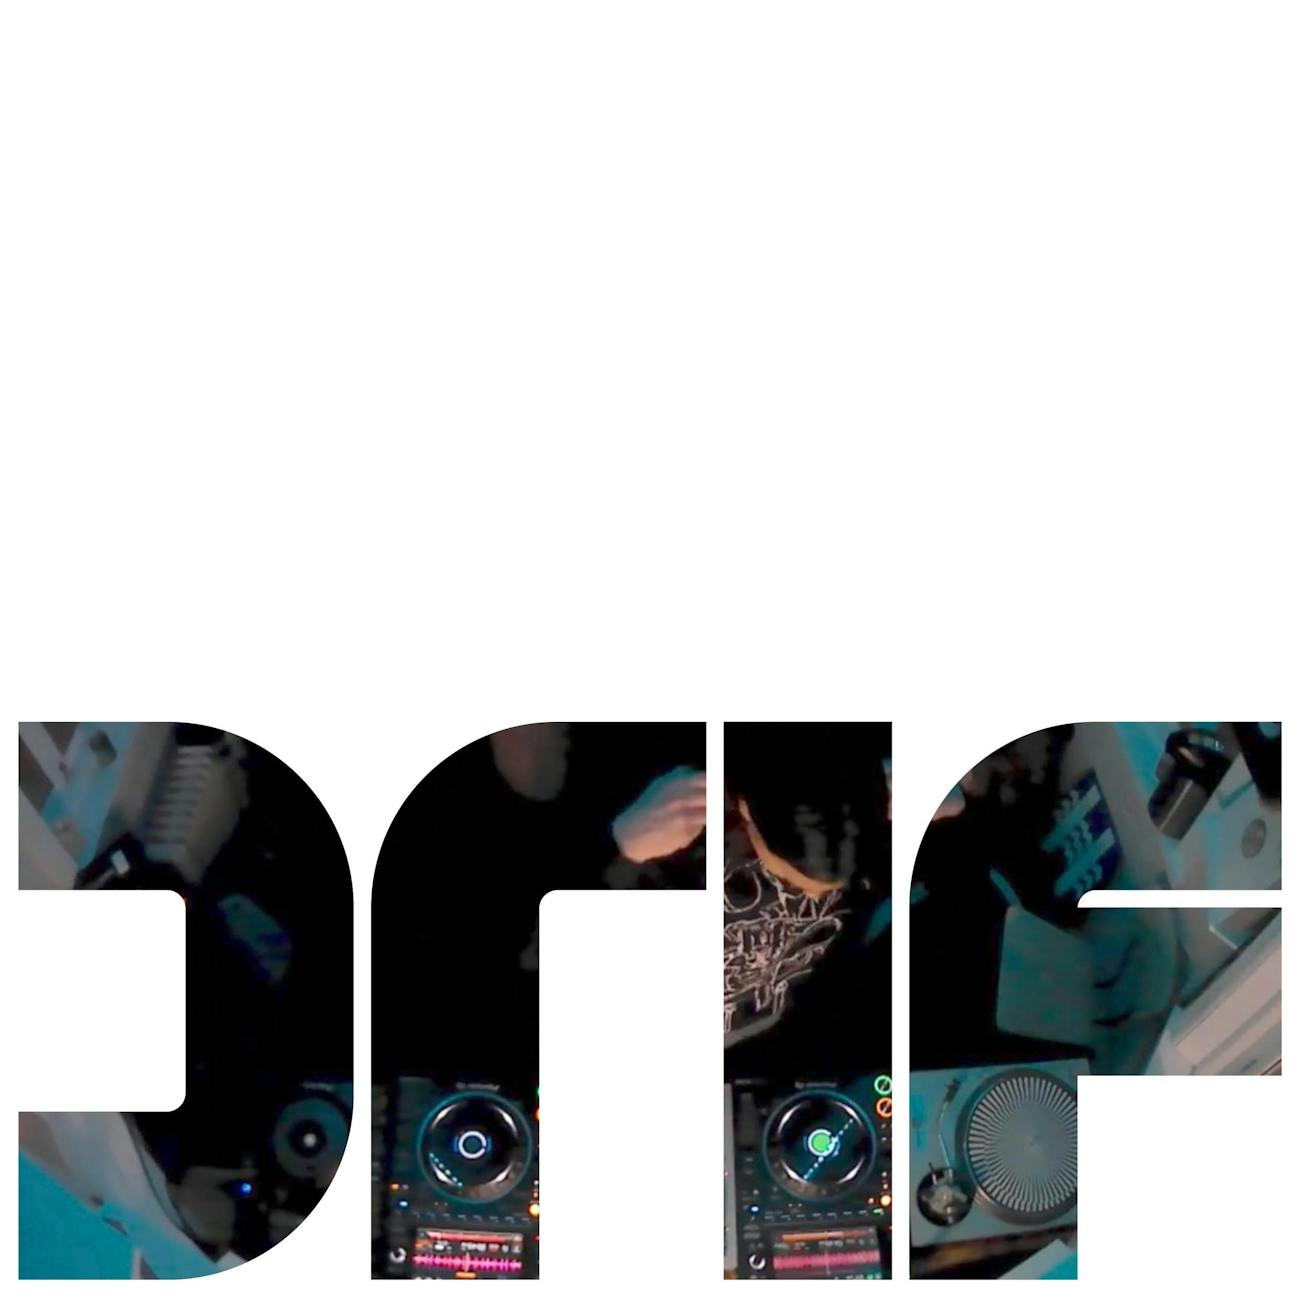 Logo DRIF with a background of a DJ table seen from above.